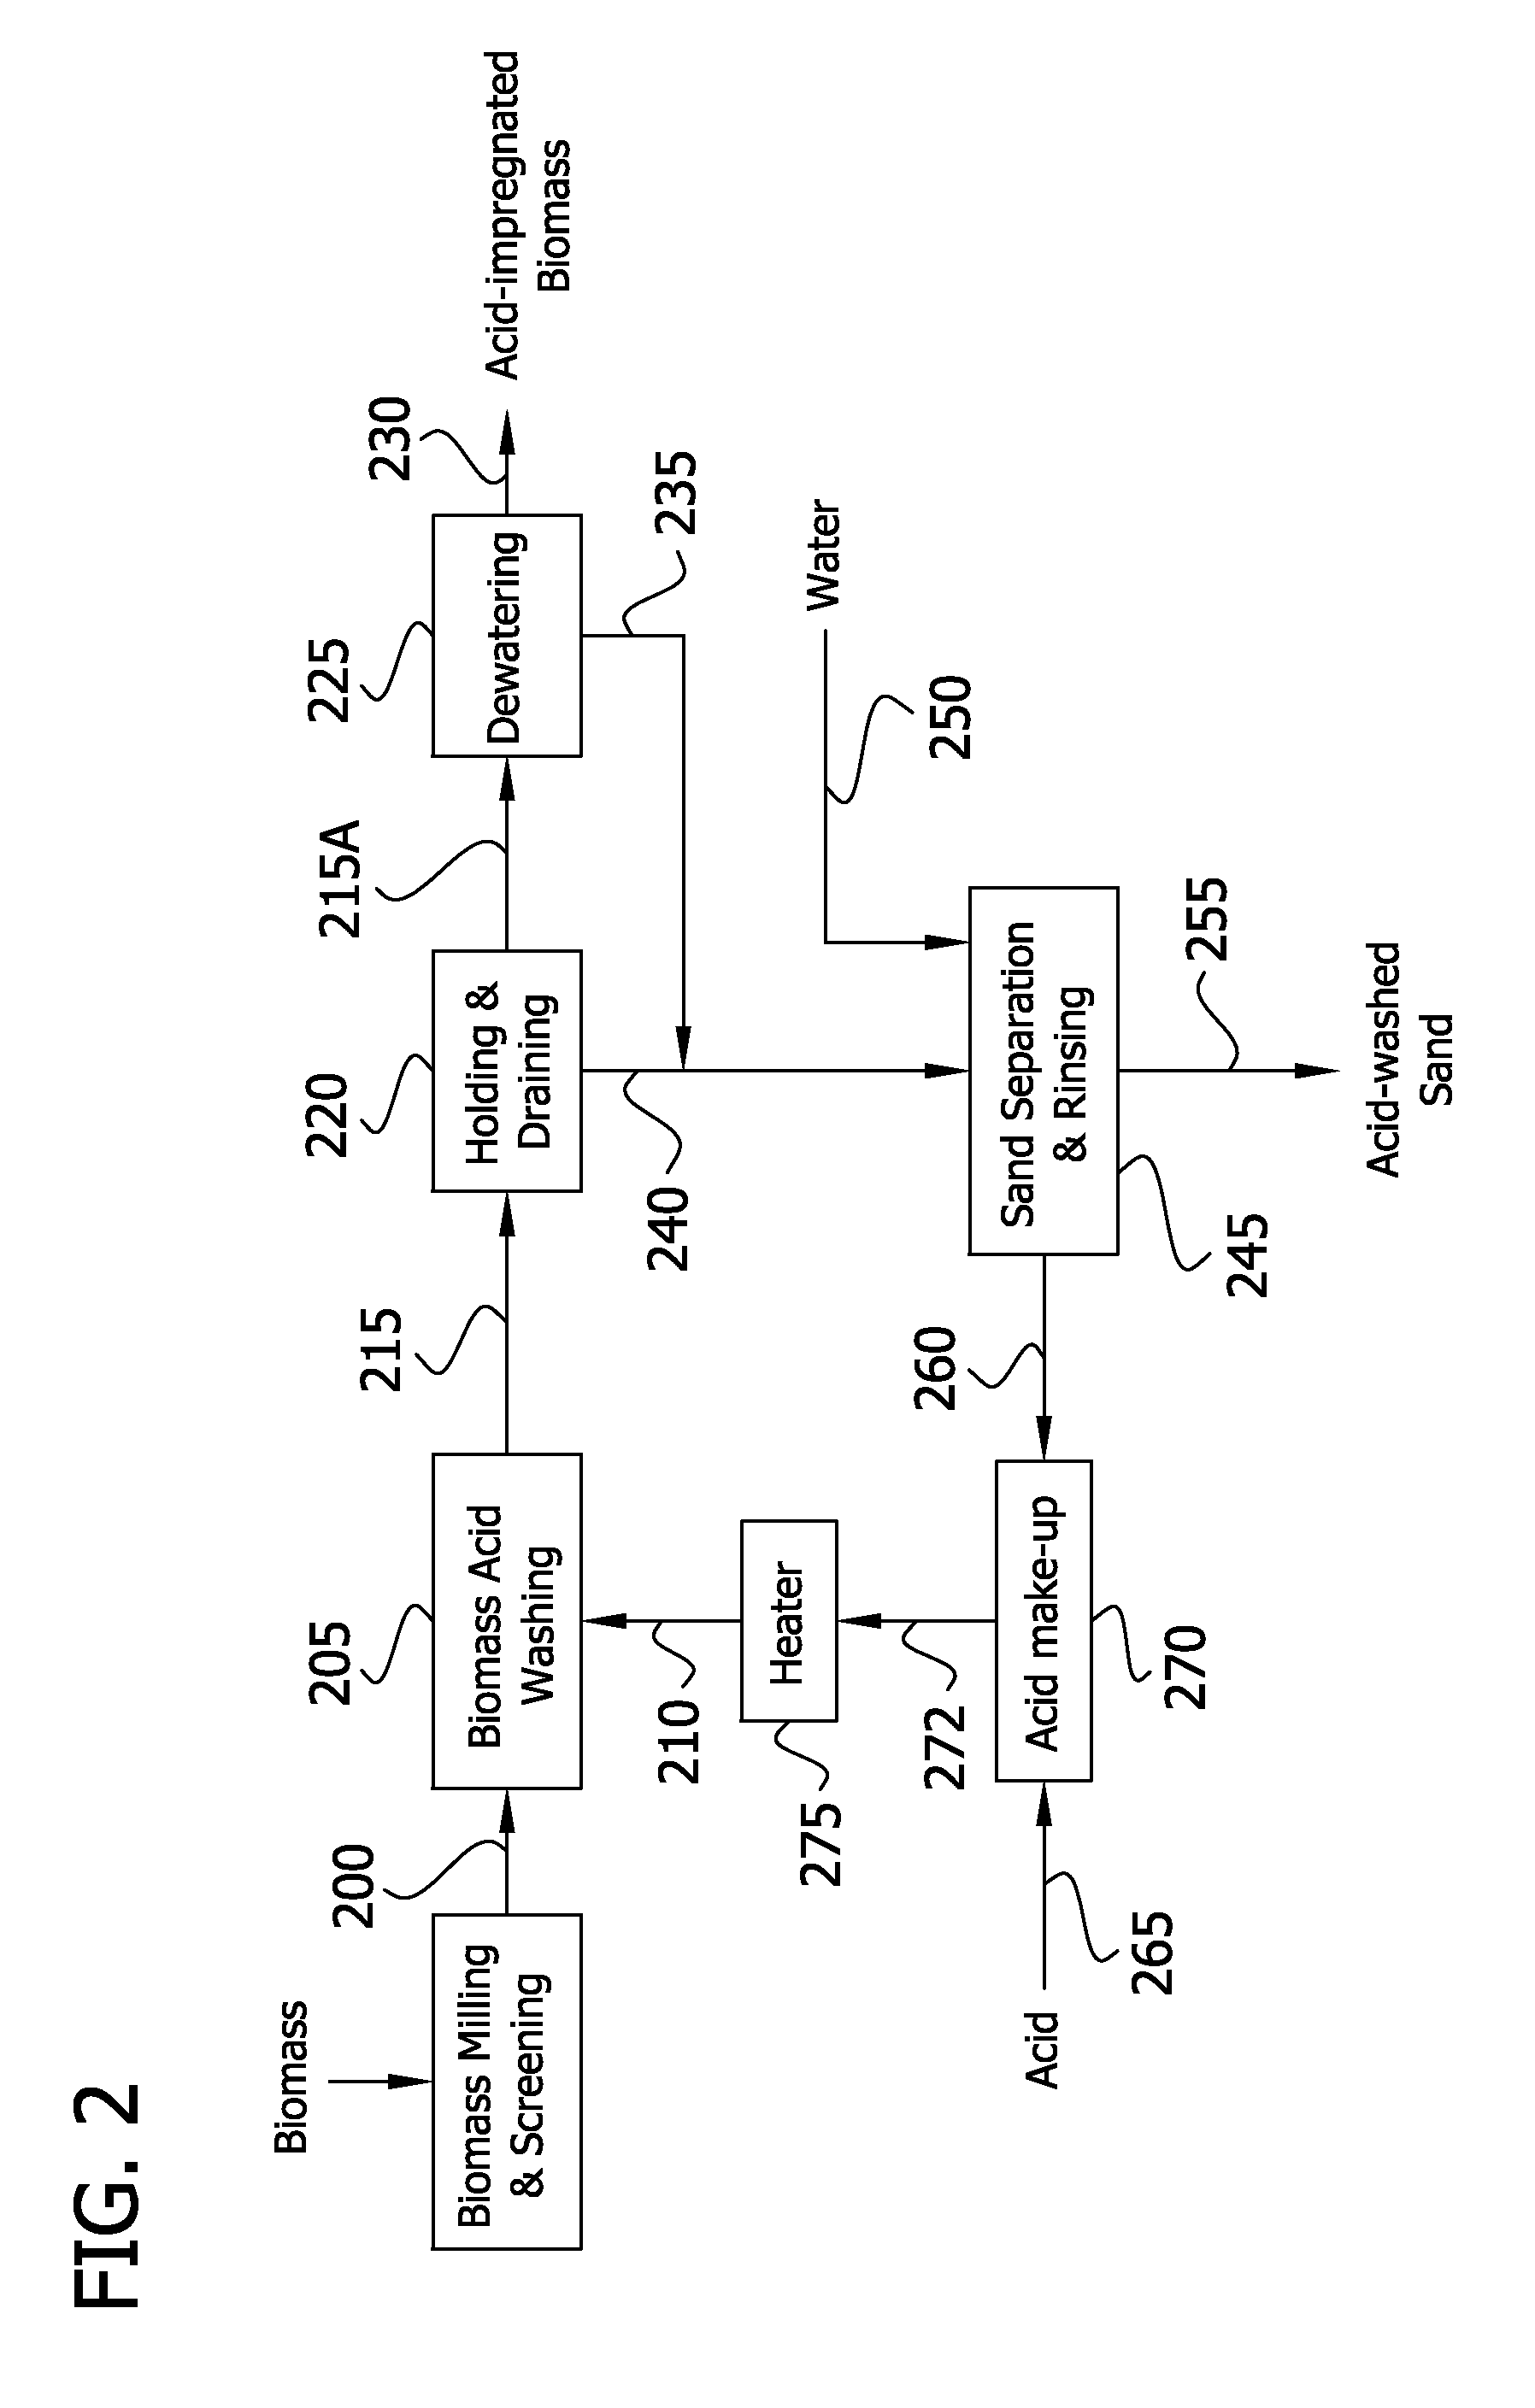 Method for producing ethanol and co-products from cellulosic biomass